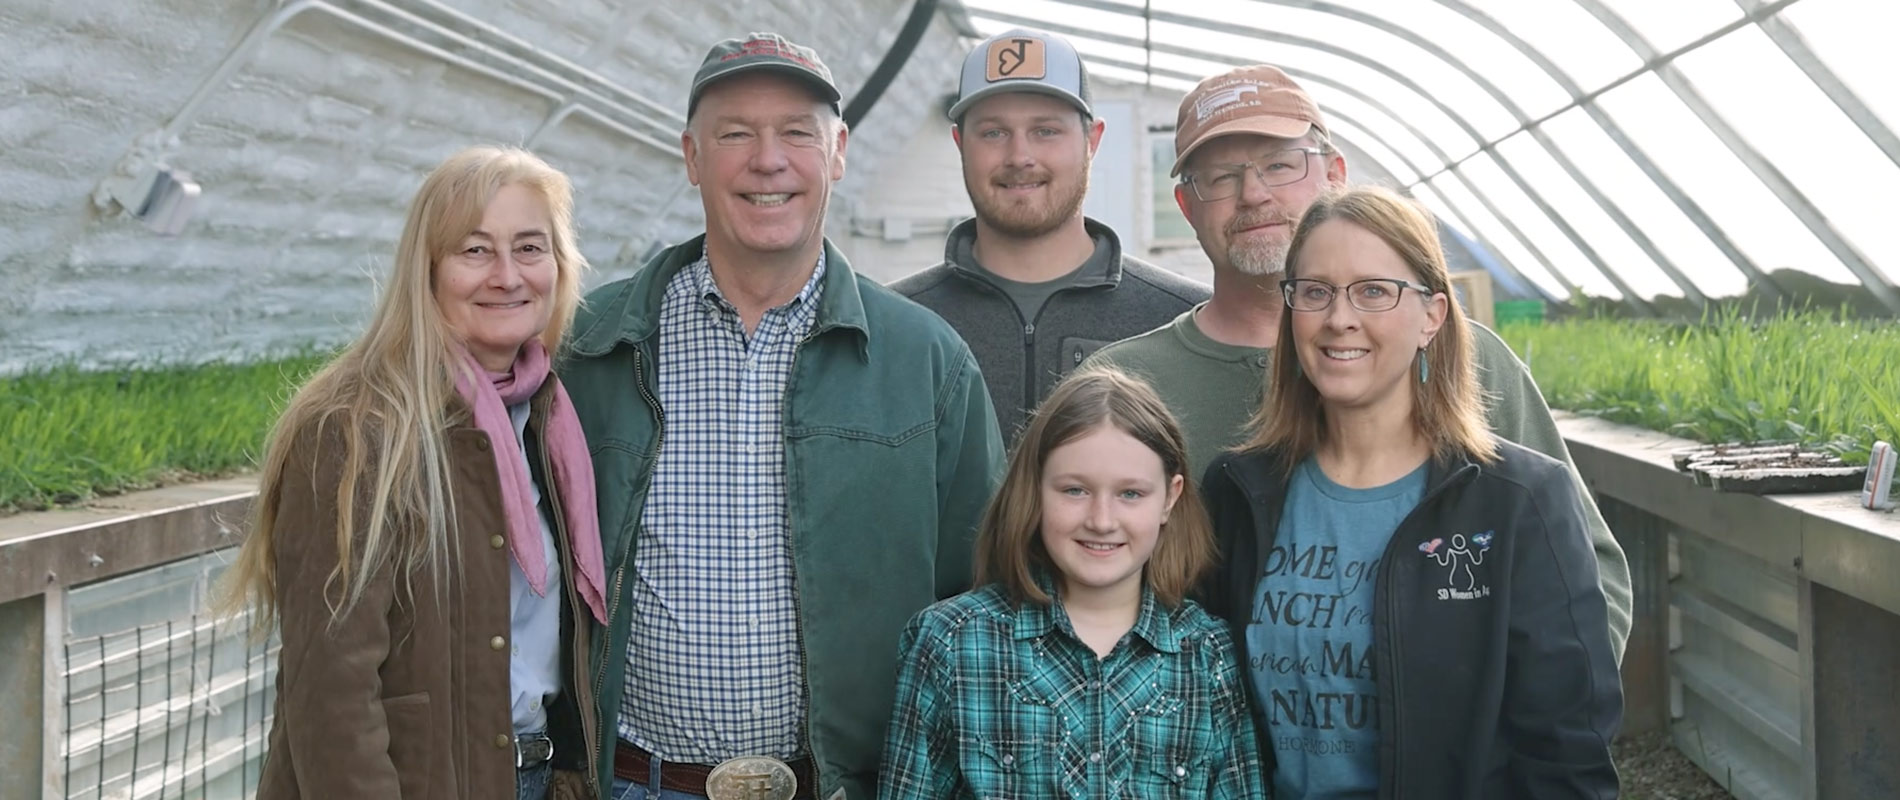 Greg and Susan Gianforte with people in greenhouse